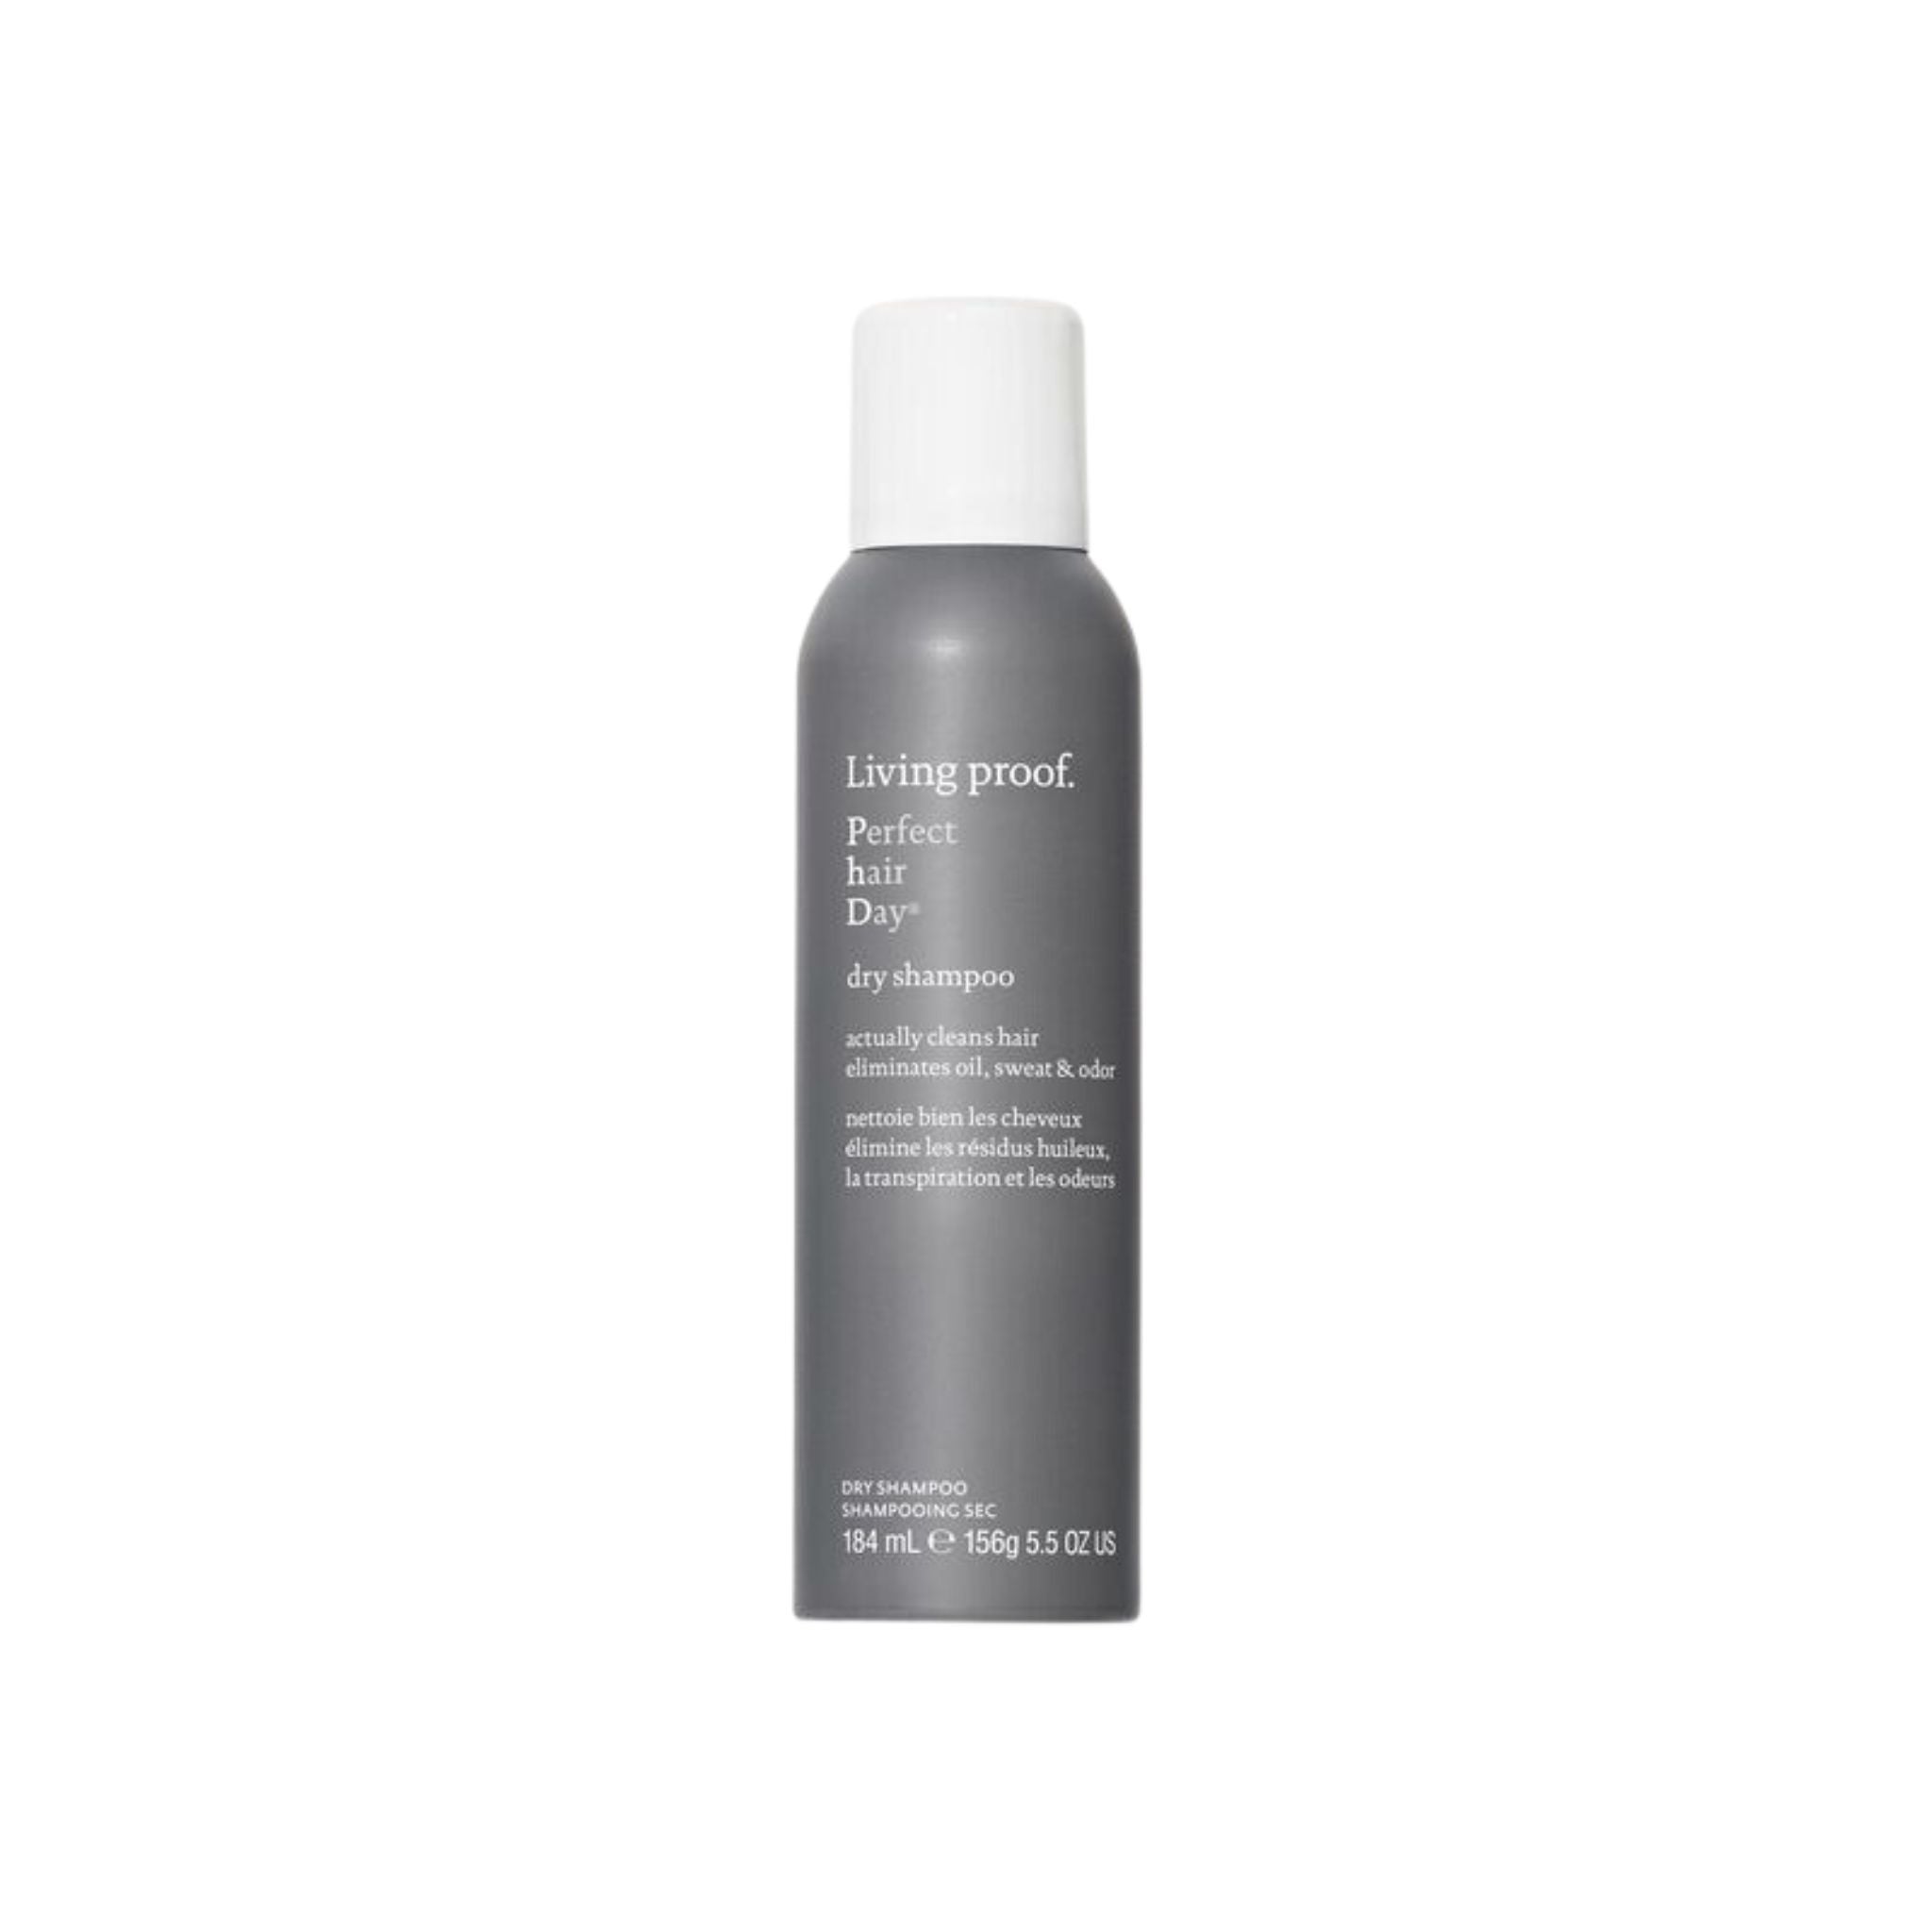 Living Proof - Perfect Hair Day Dry Shampoo 184ml